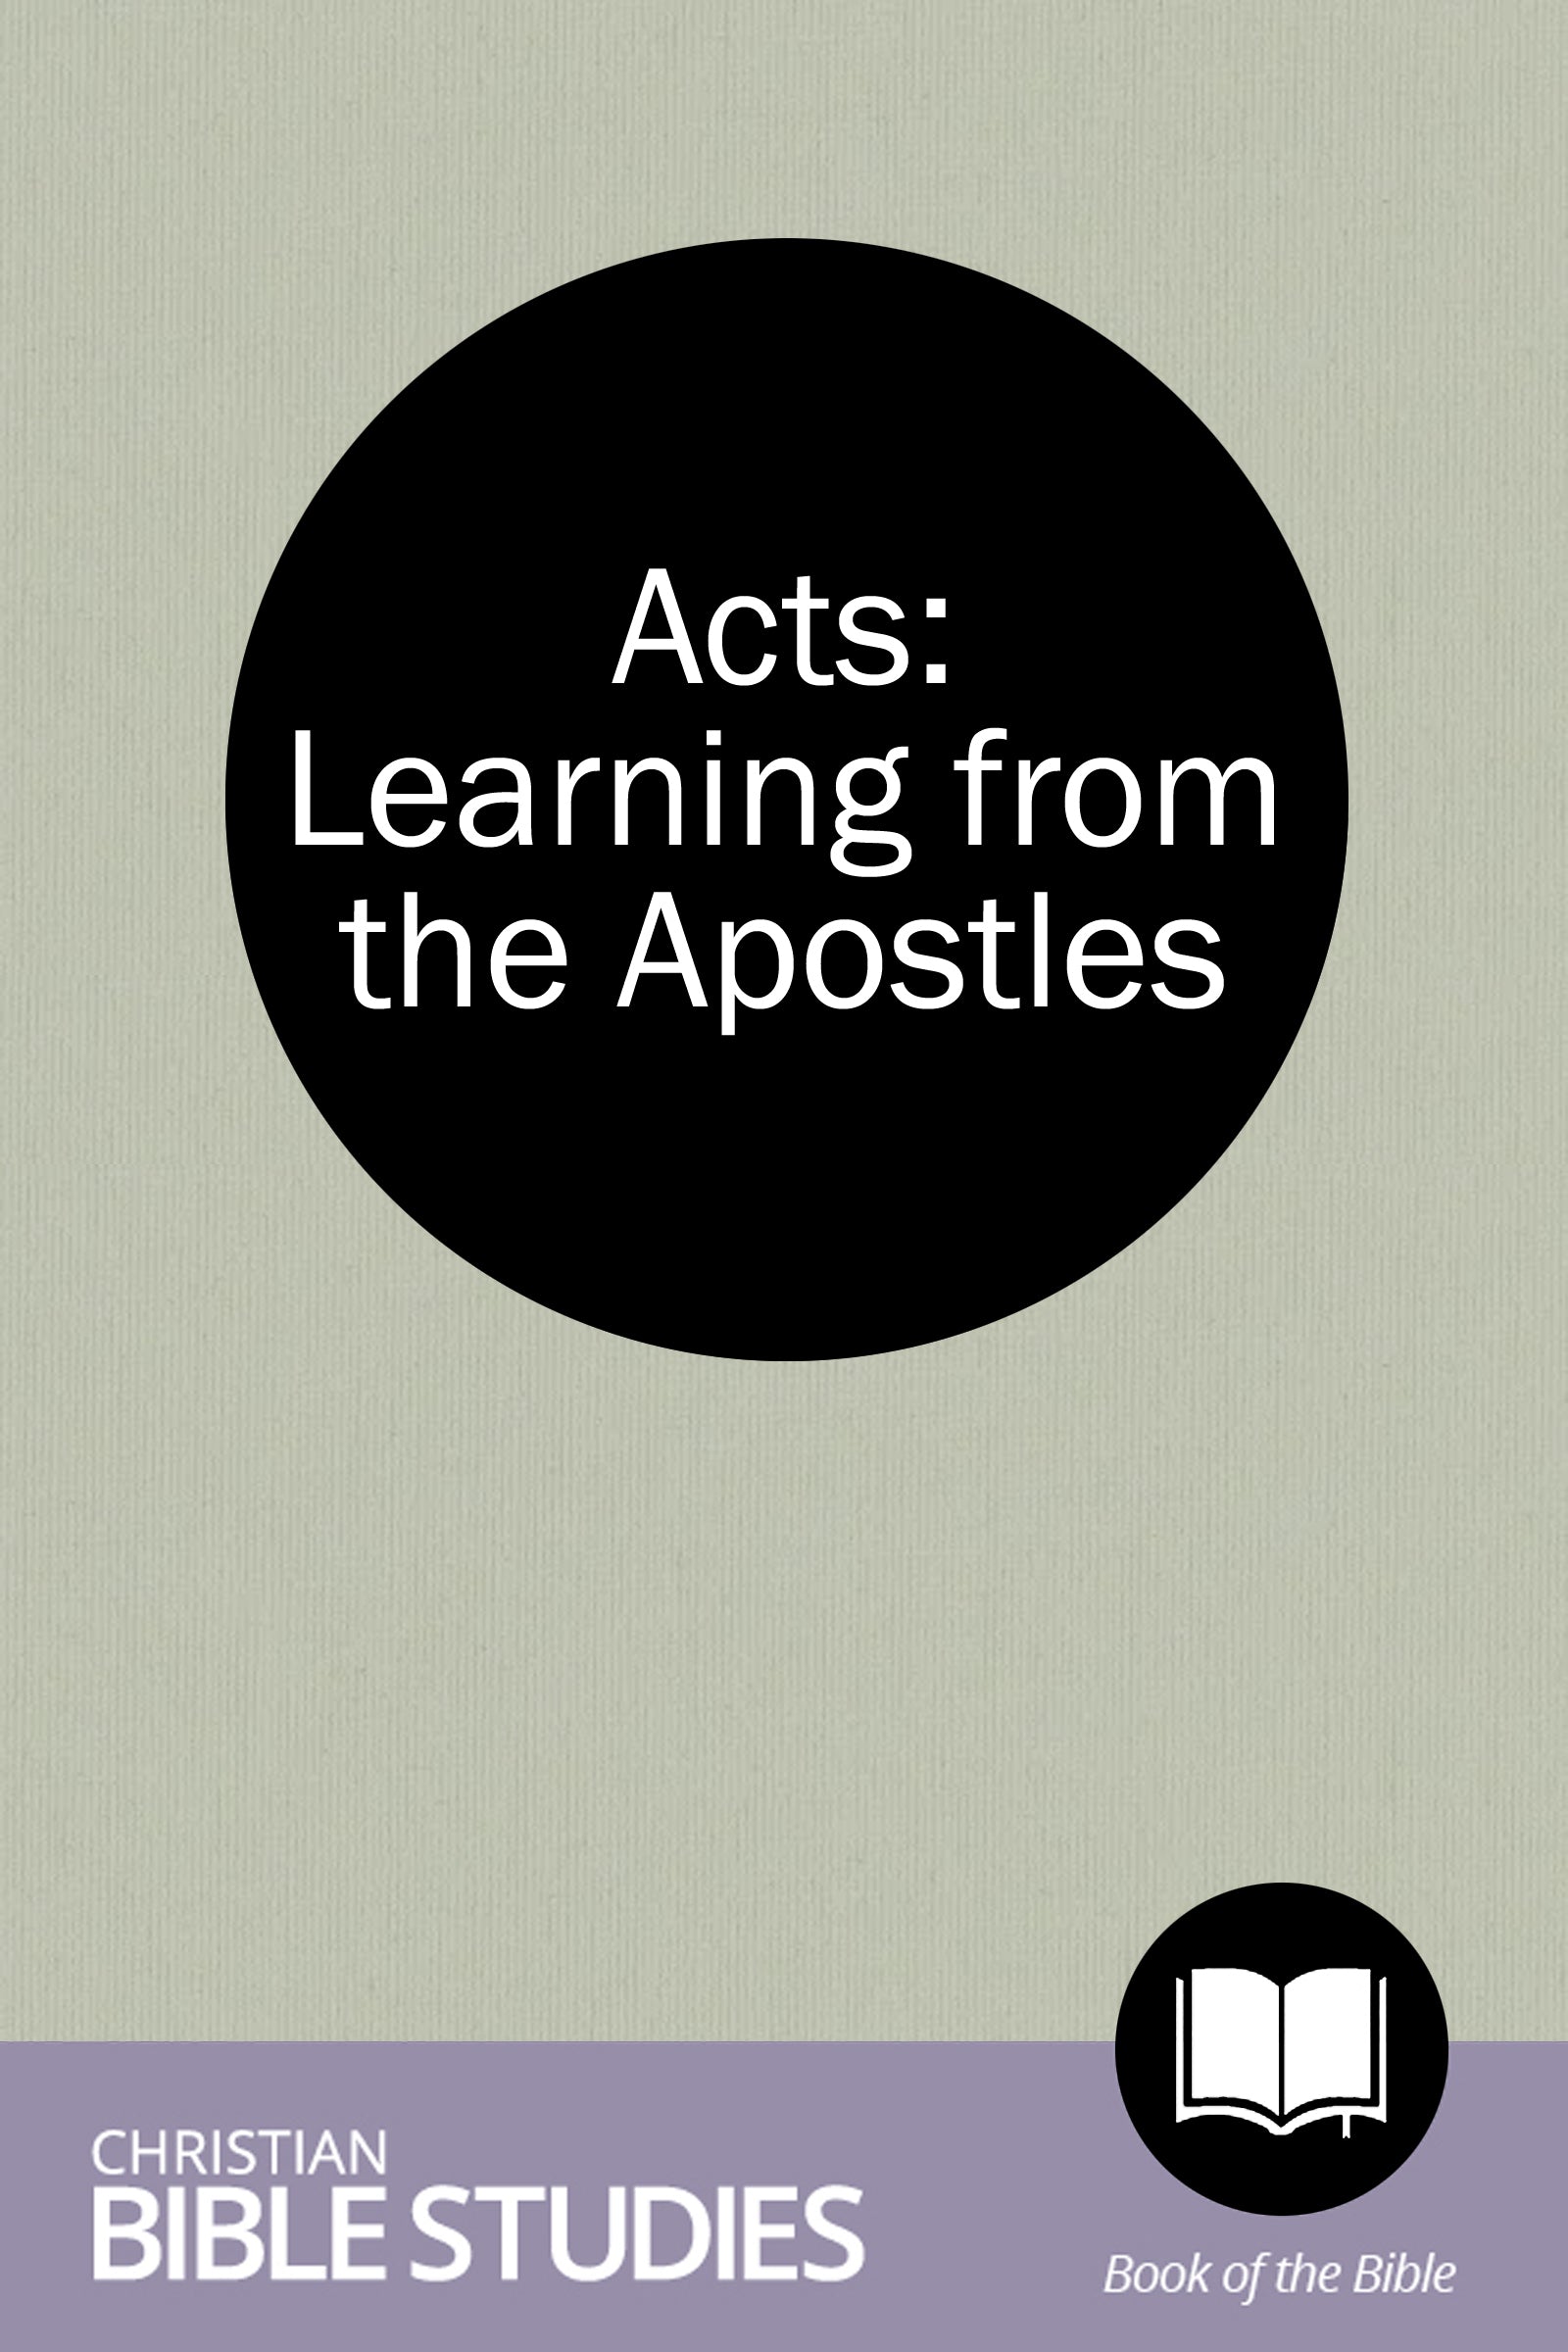 Acts: Learning from the Apostles